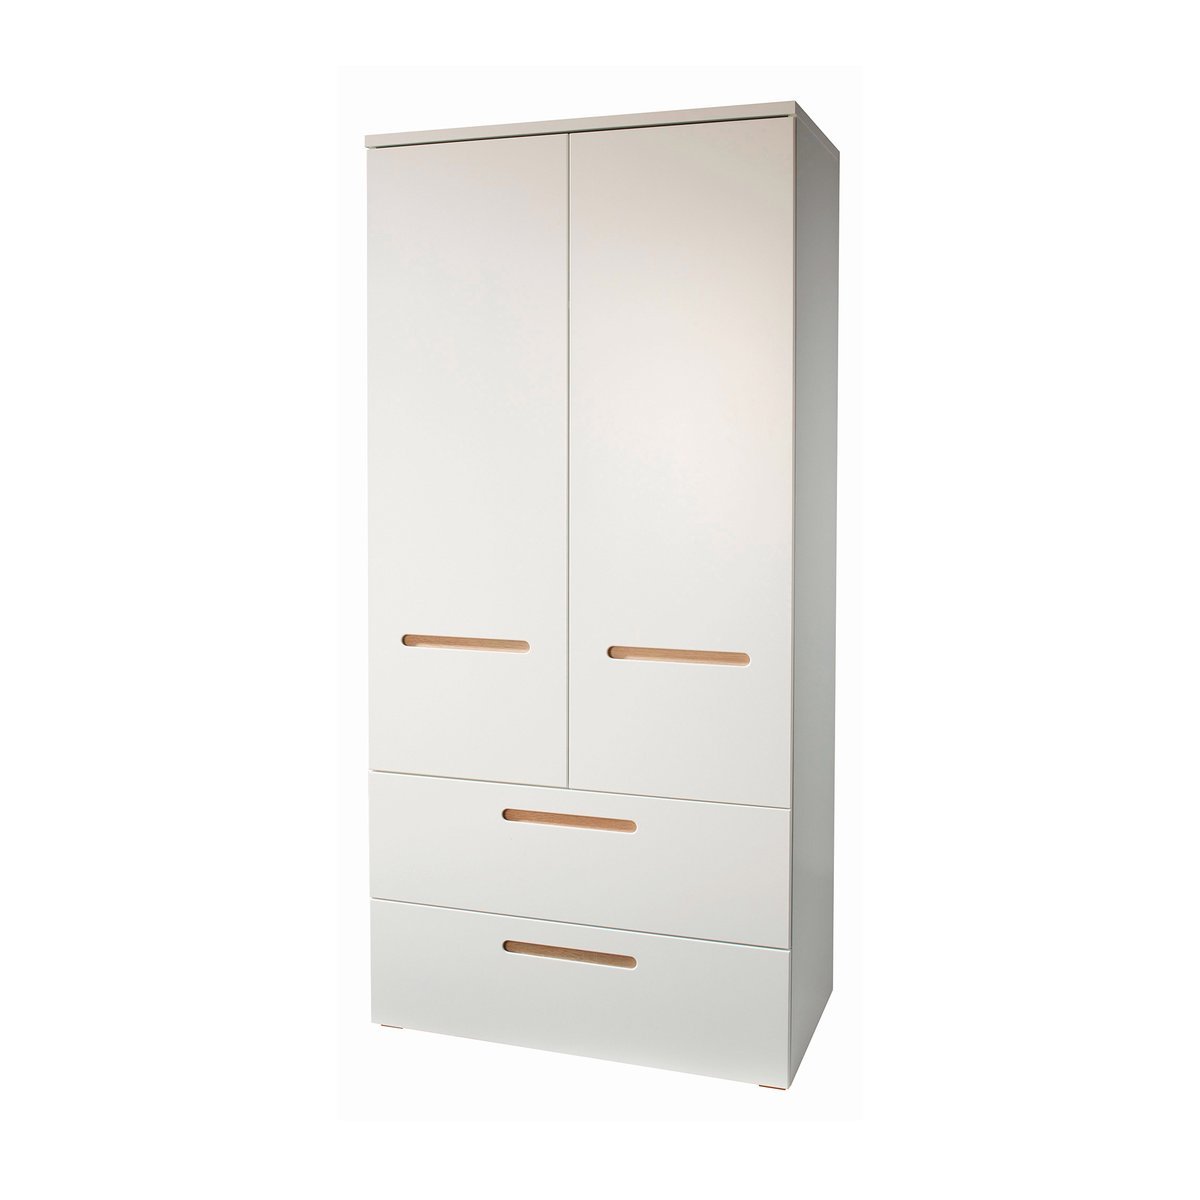 Roba Series – Assorted Cambino City, Nursery Furniture is available * *